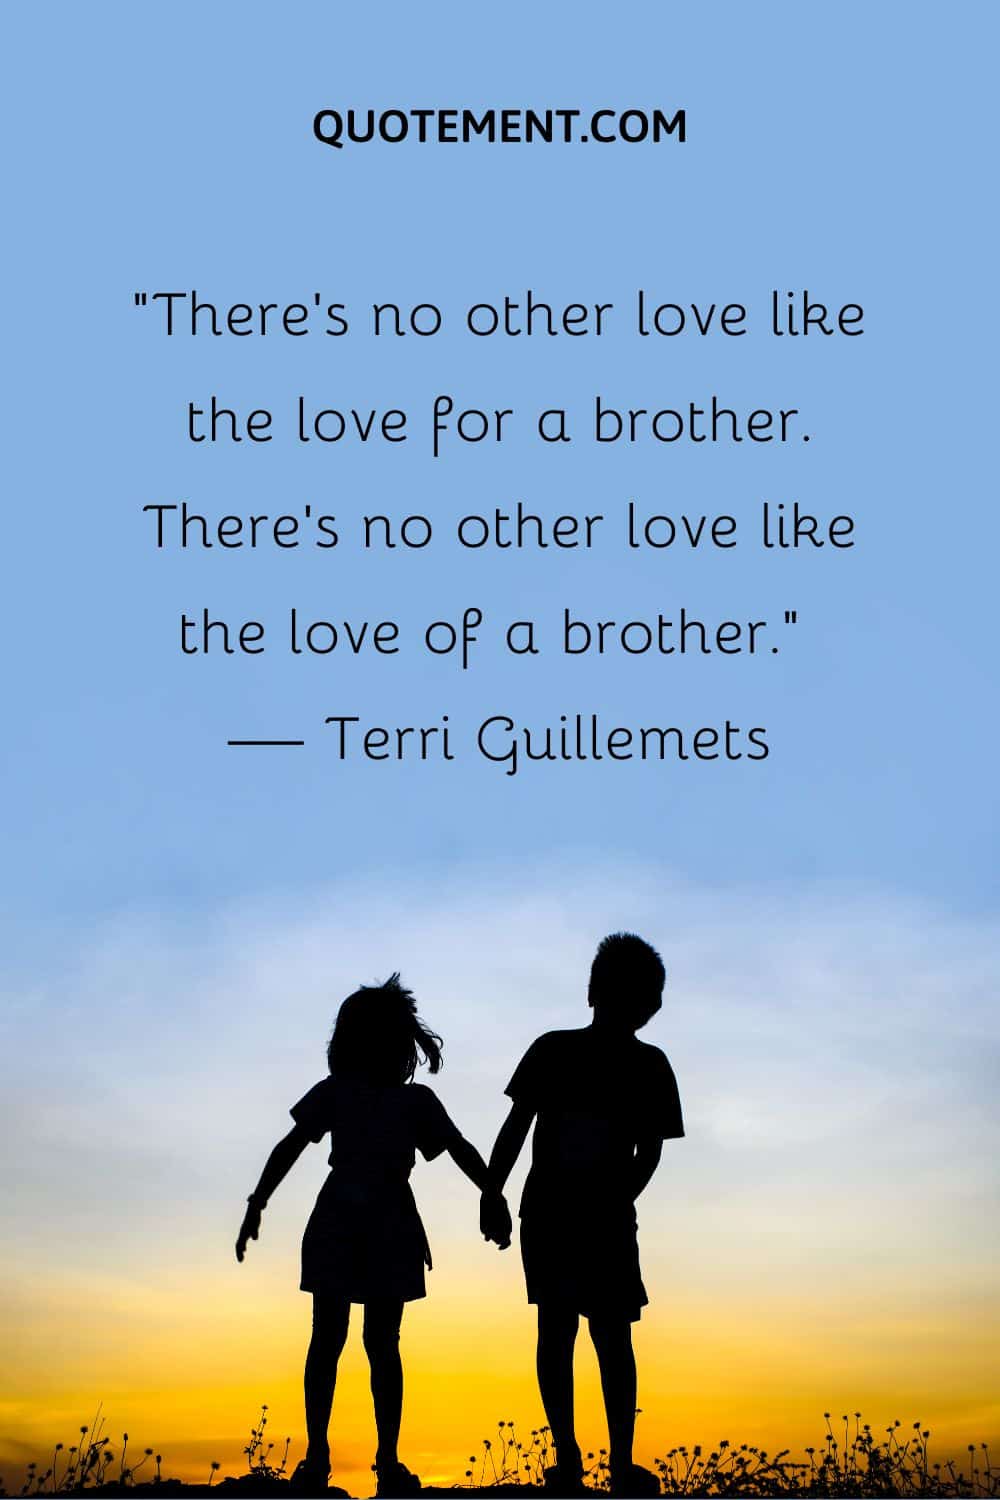 “There’s no other love like the love for a brother. There’s no other love like the love of a brother.” — Terri Guillemets